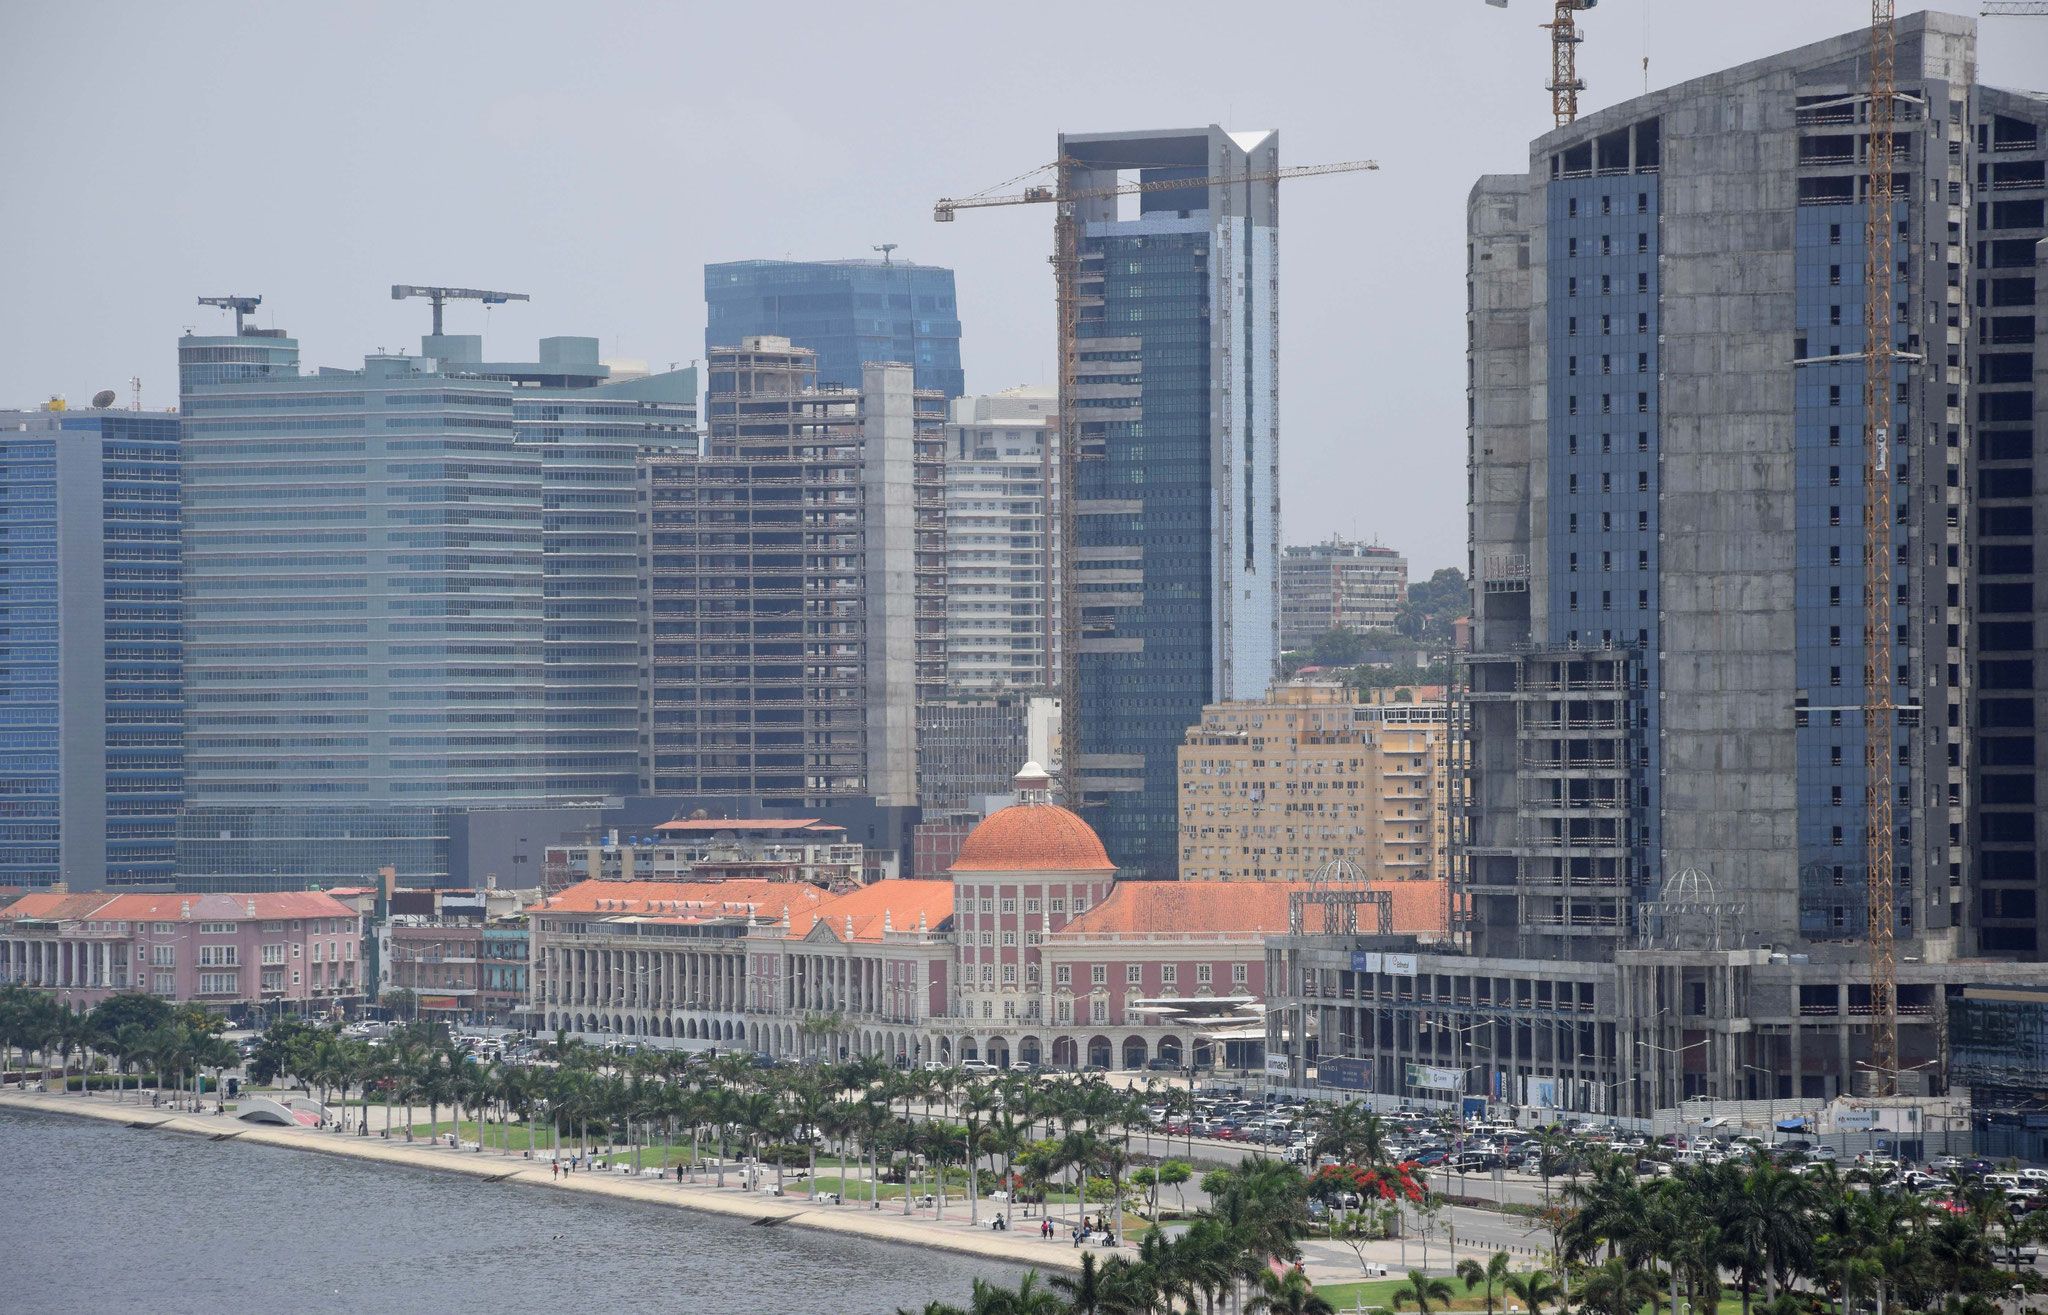 State of Angola’s economy taking centre stage in the polls